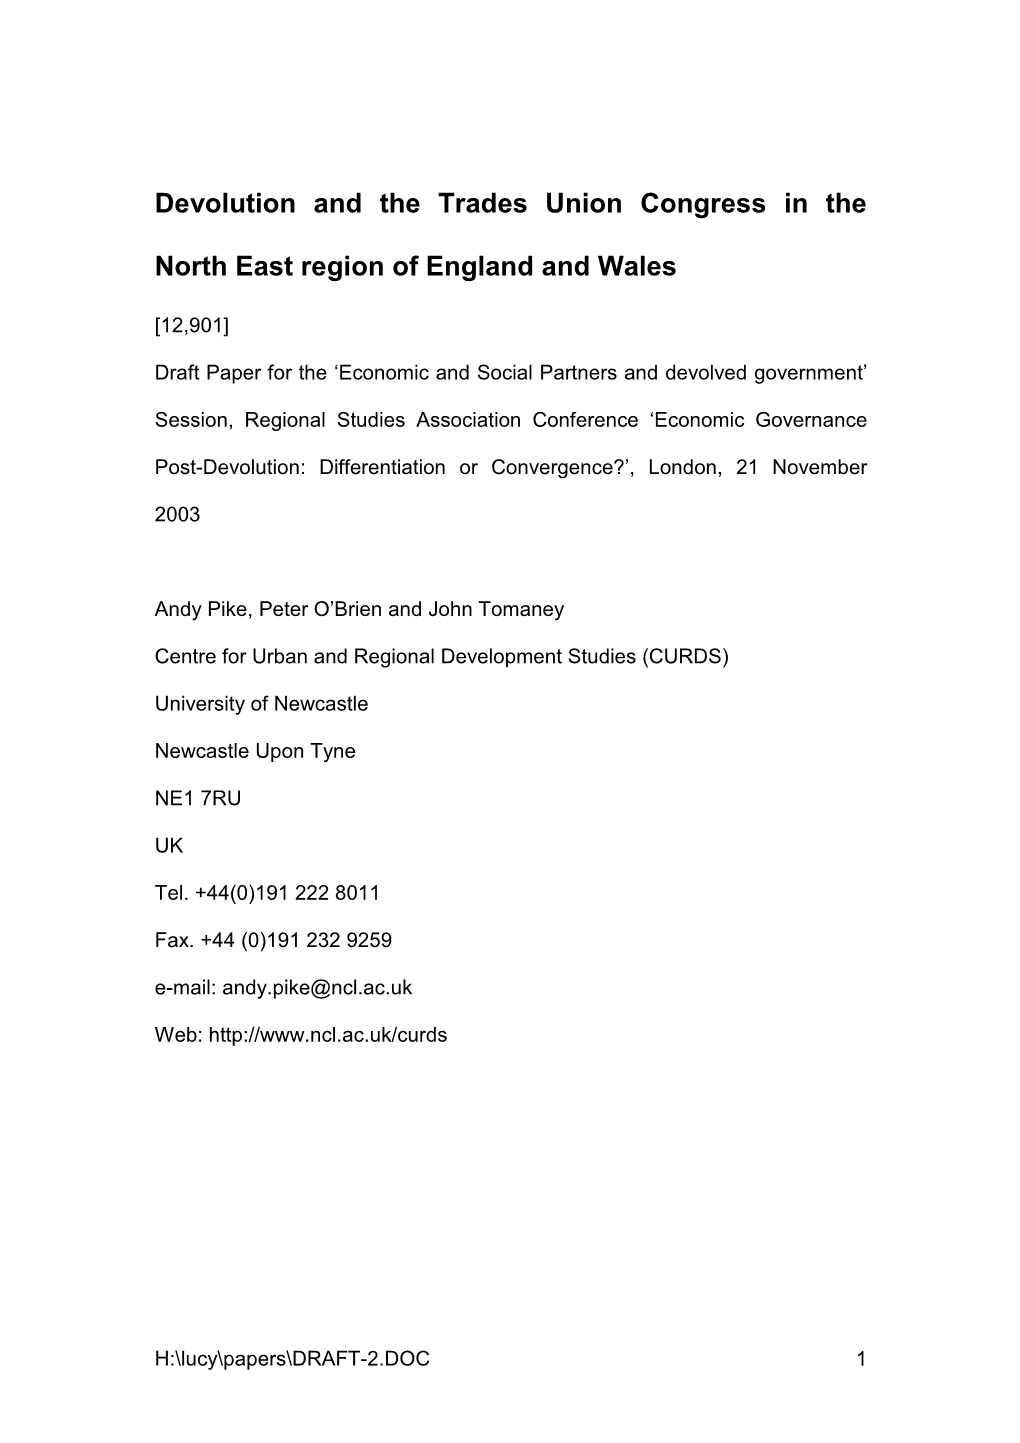 Devolution and the Trades Union Congress in the North East Region